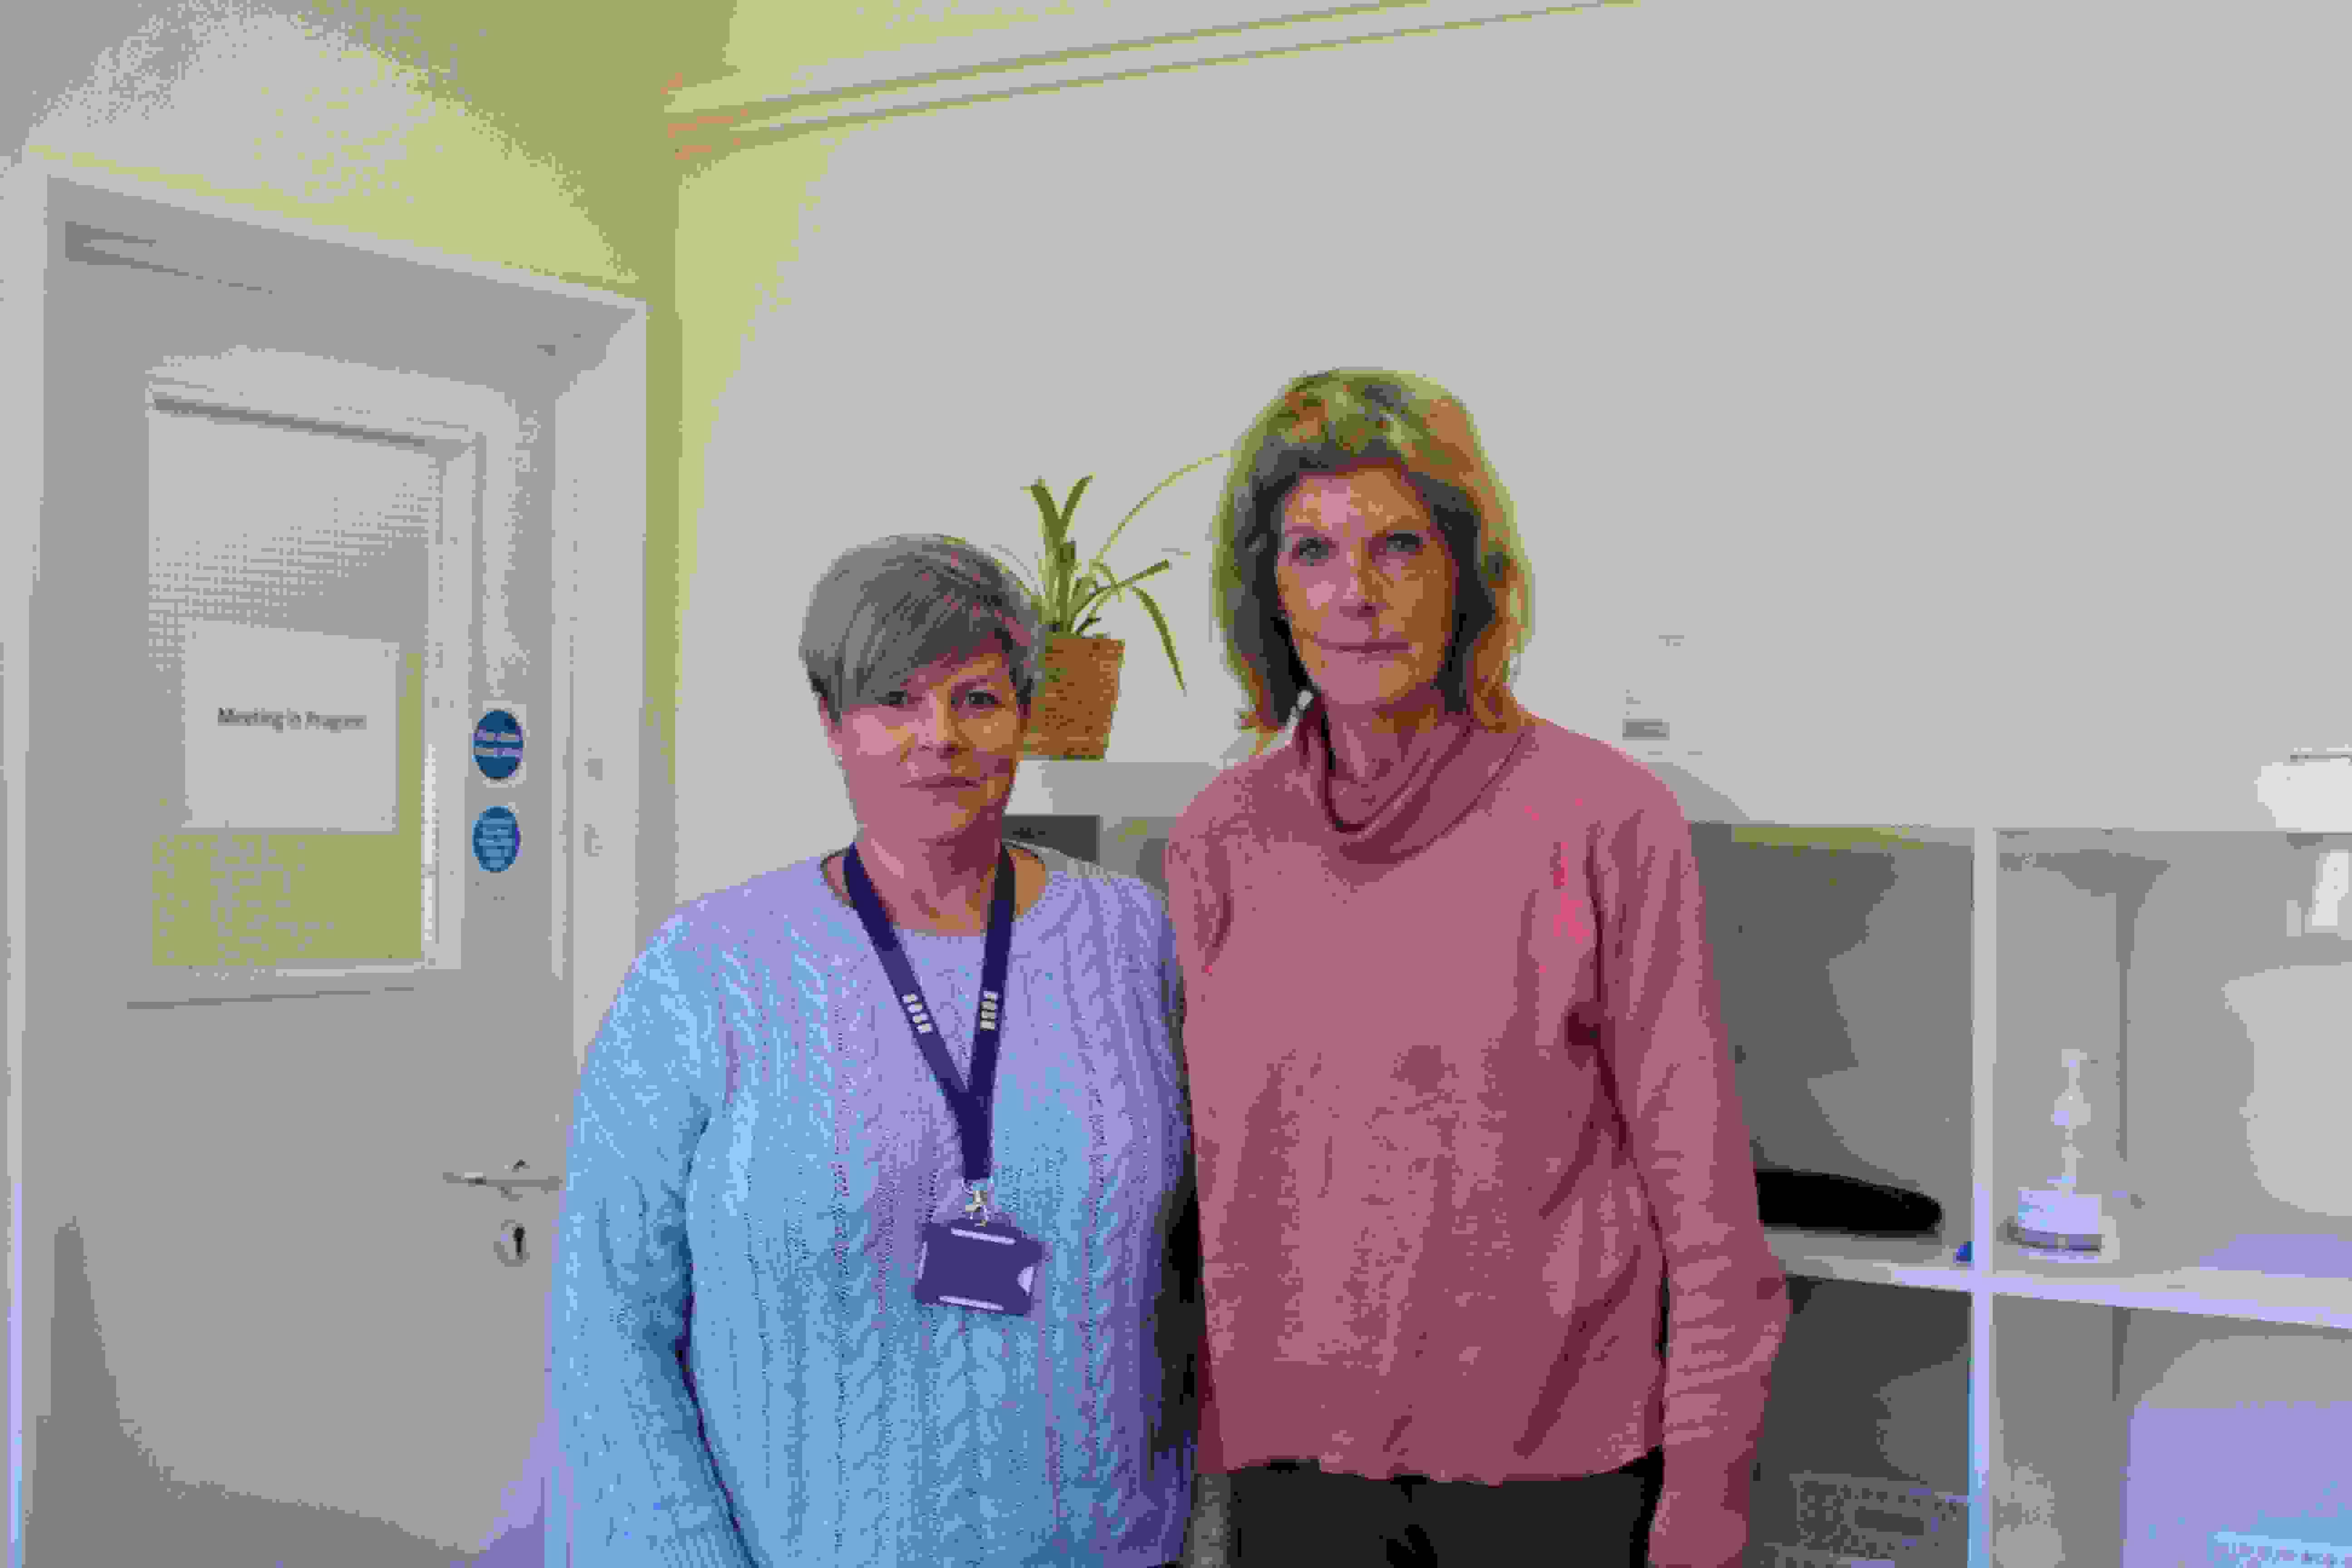 Margot Cooper, our Founder, with Julie Dempster, Founder of BOSH.